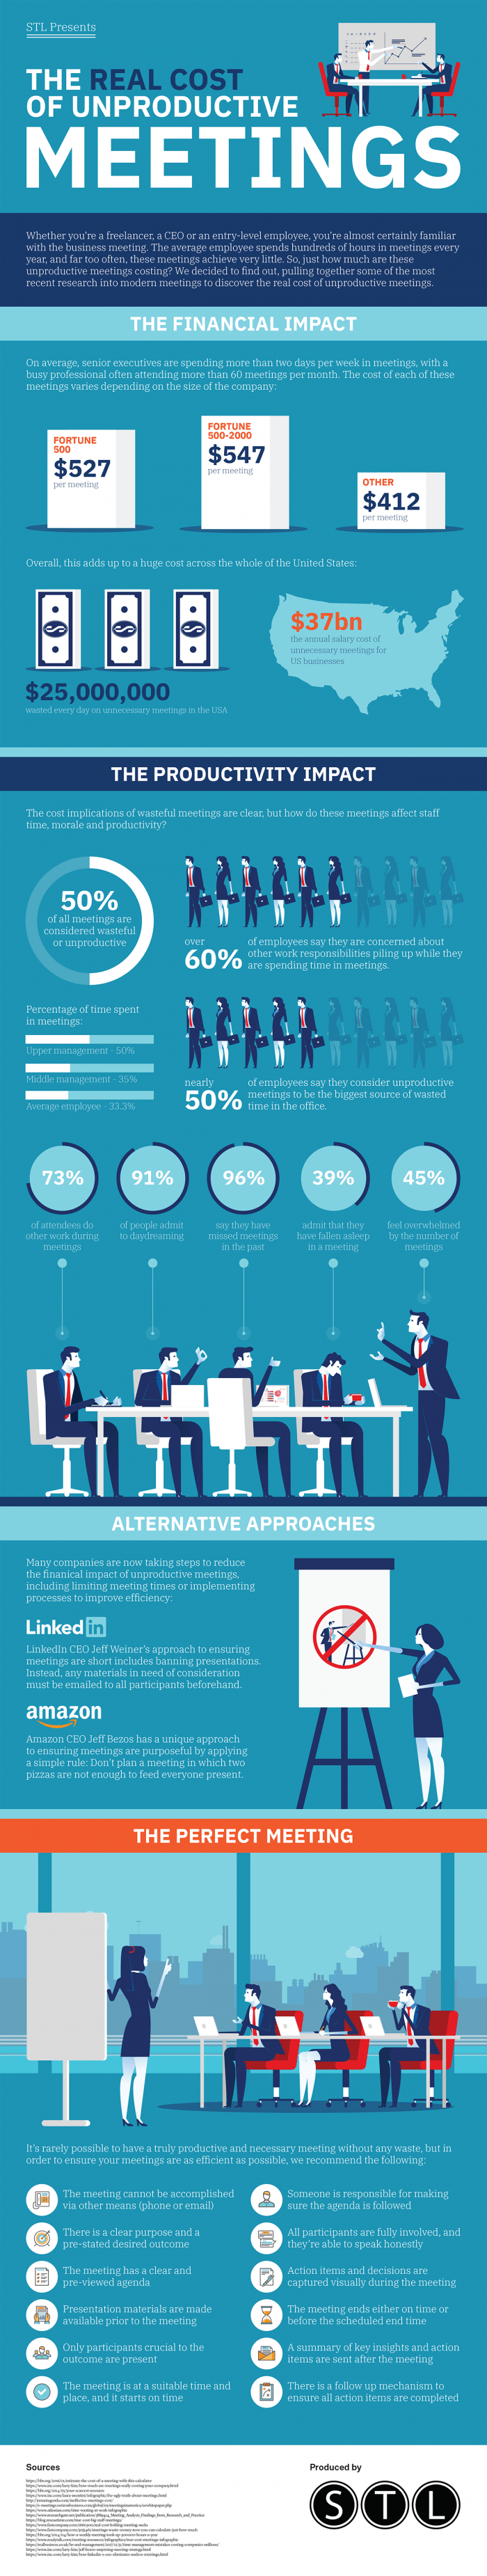 infographic describes the Real cost of unproductive meetings and gives tips for making your meetings more efficient